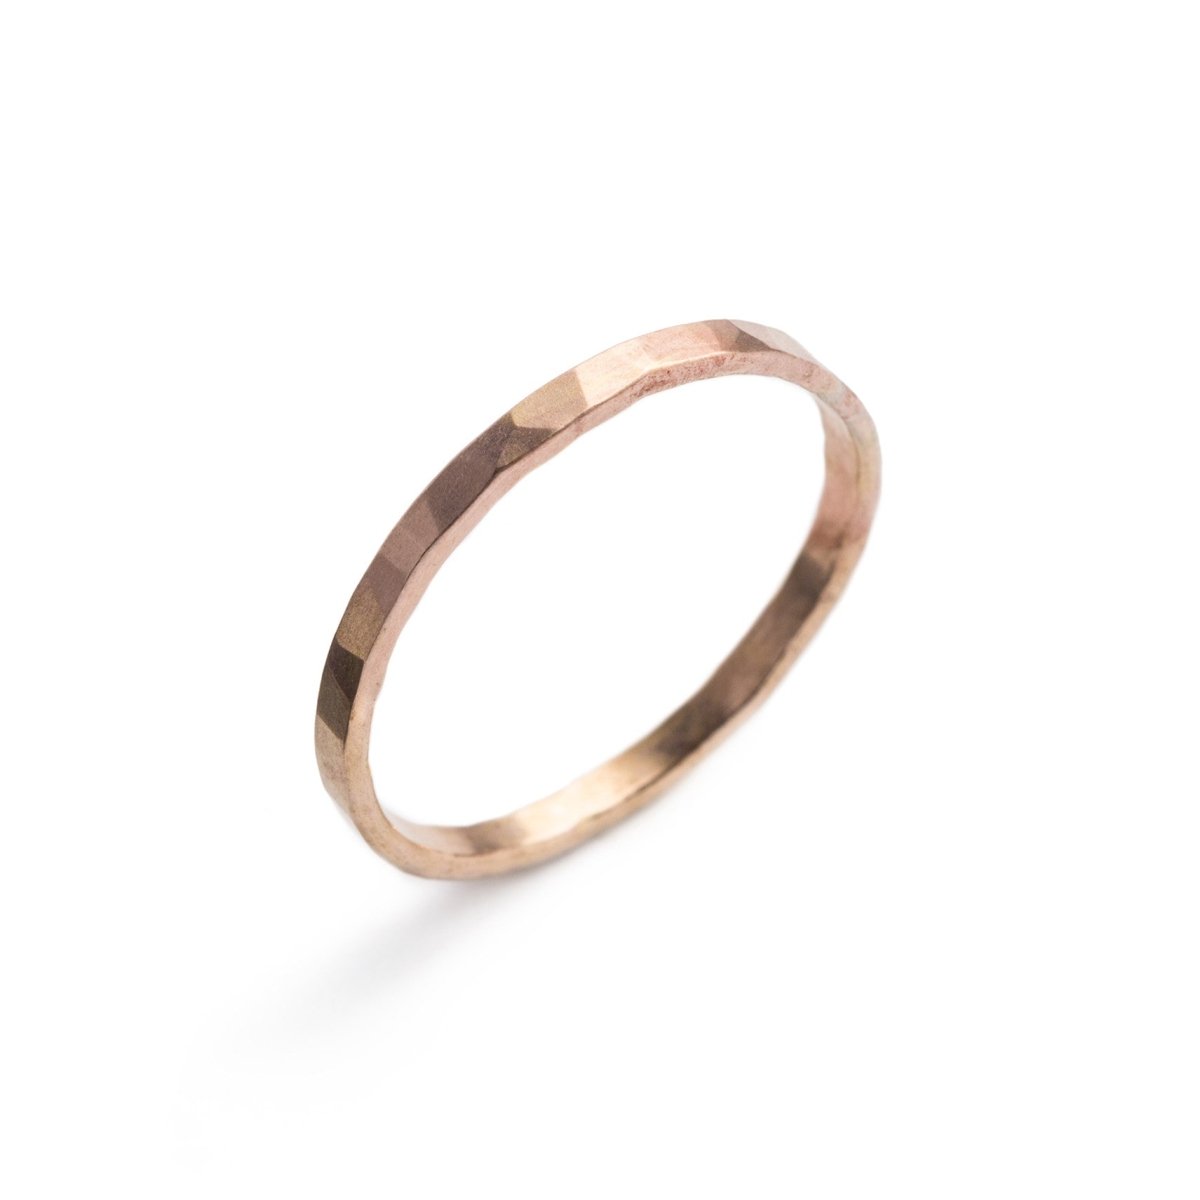 14k solid gold soldered band with a hammered texture. Hand-crafted in Portland, Oregon. 